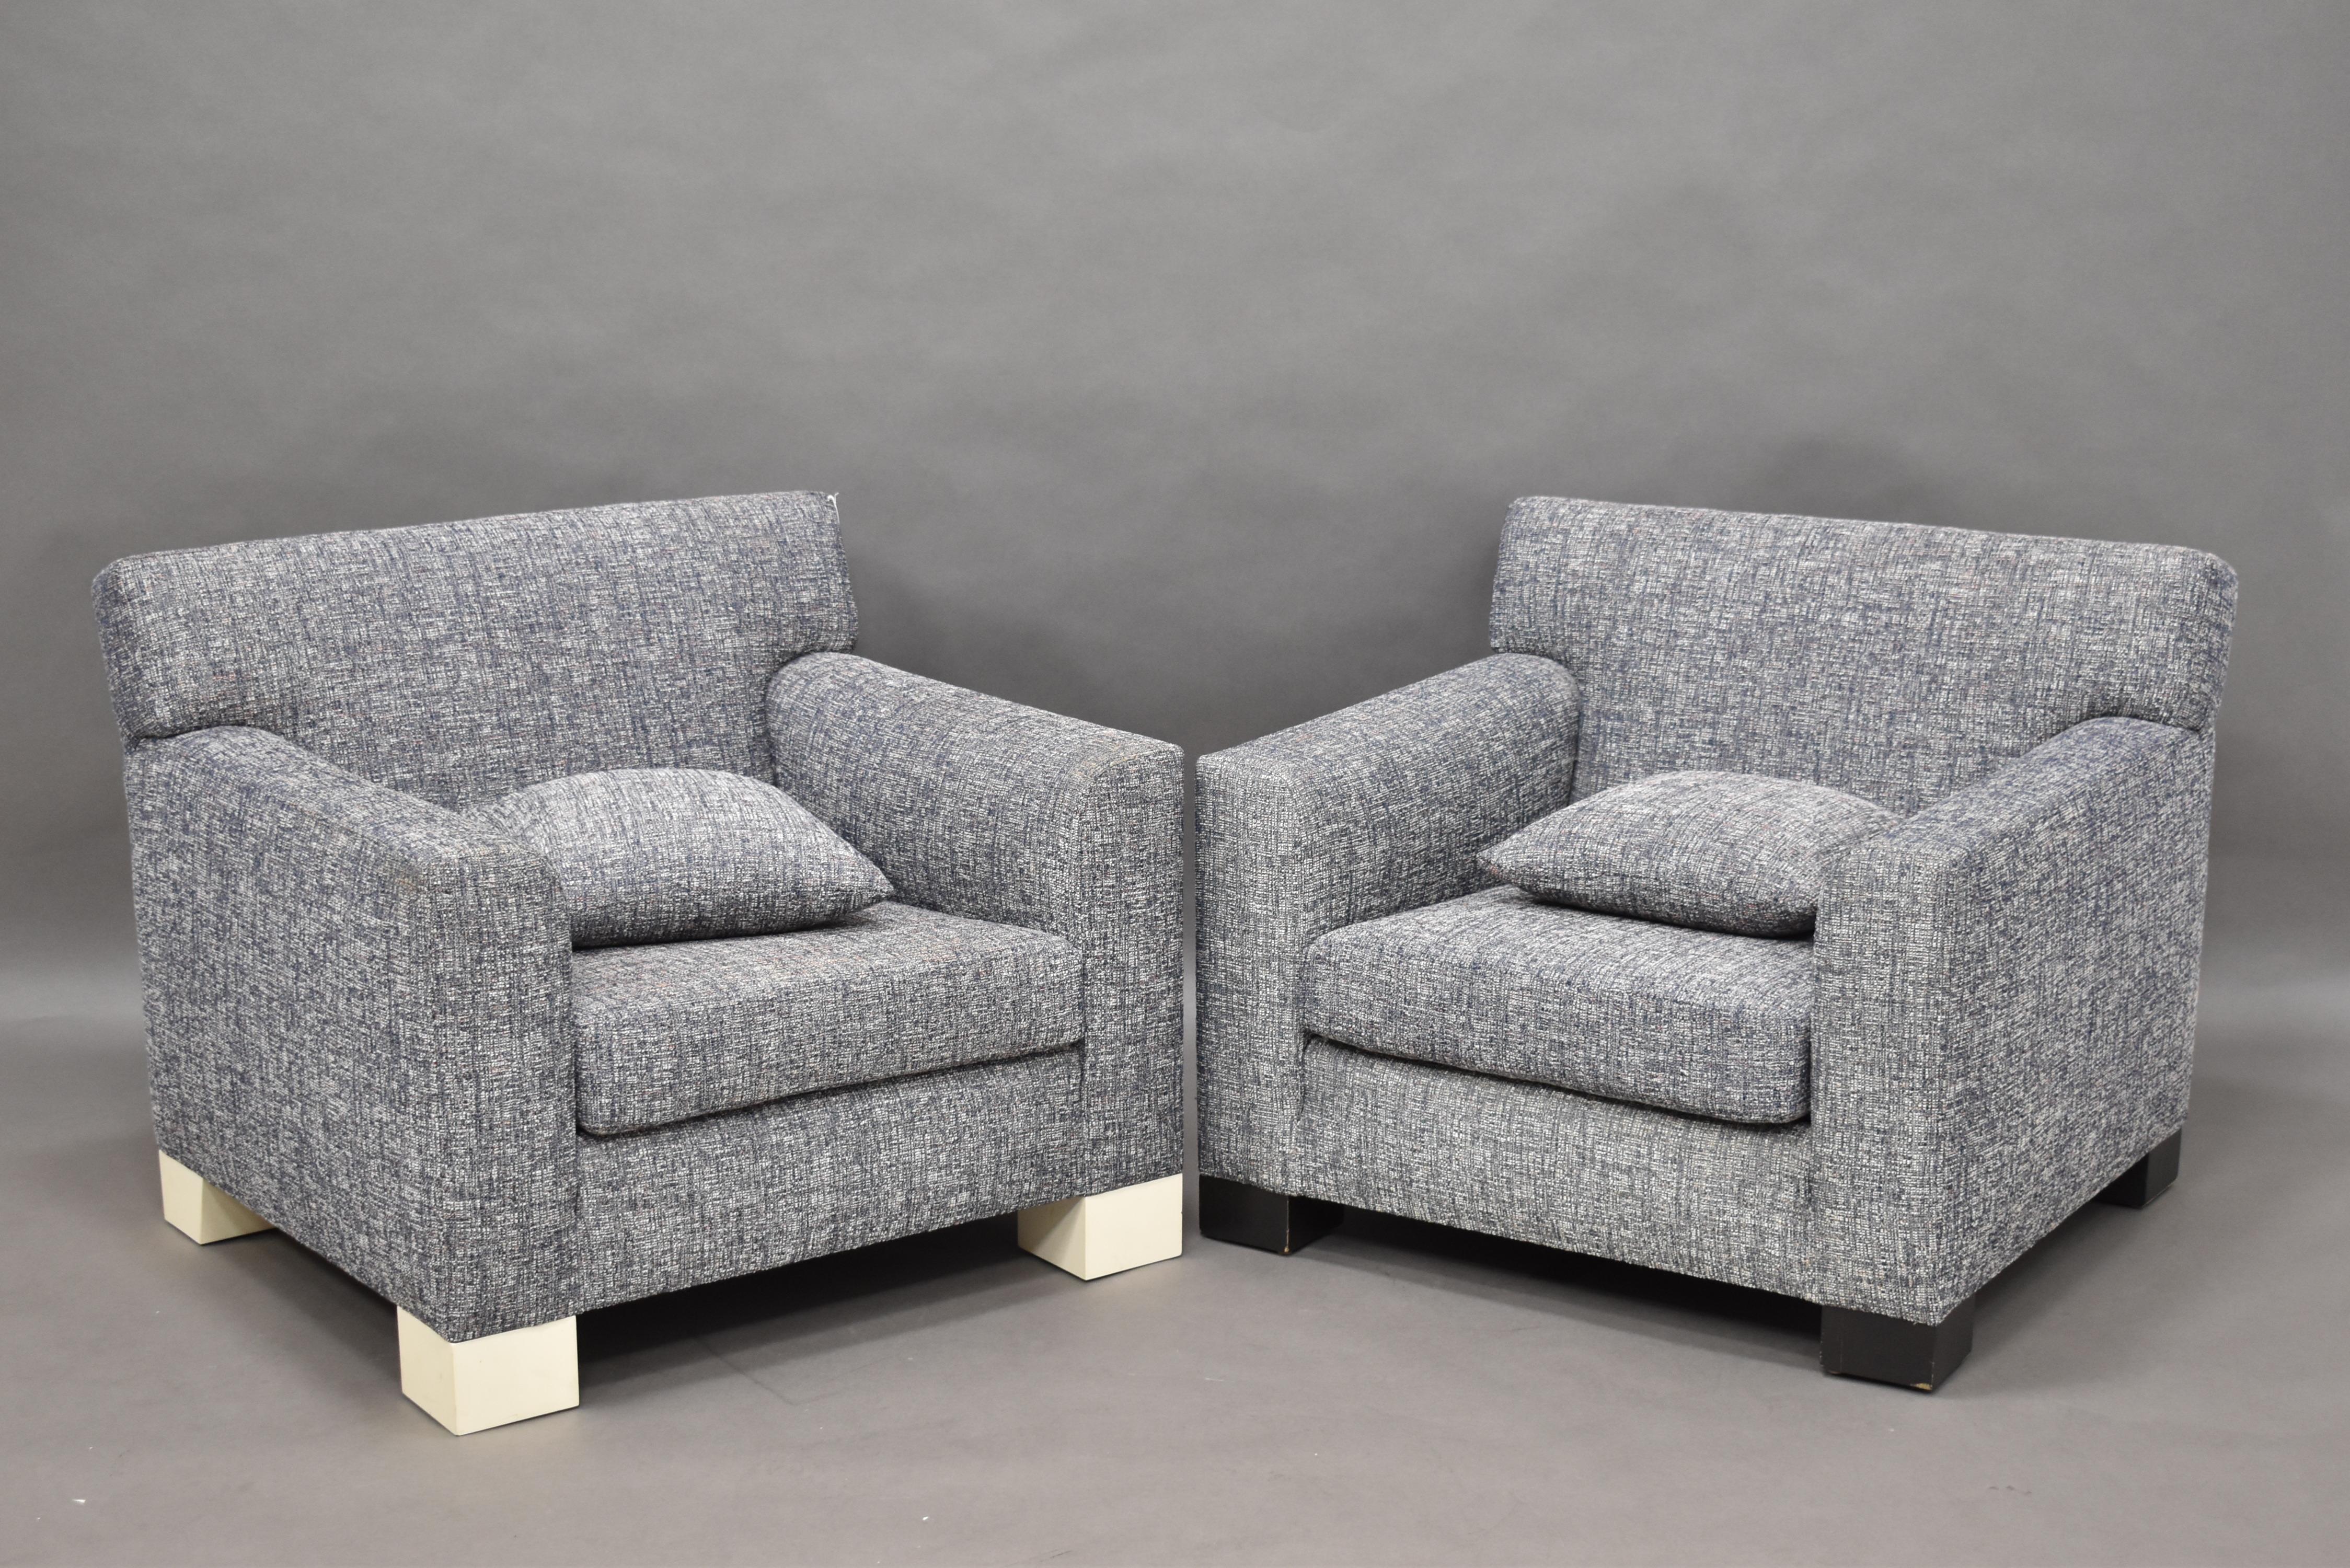 Beautiful original pair of squared and geometric lounge chairs by Roy McMakin. Original basket weave grey/white/steel blue upholstery, with loose seat cushion and square throw pillow. One example with black painted finish feet, another with white